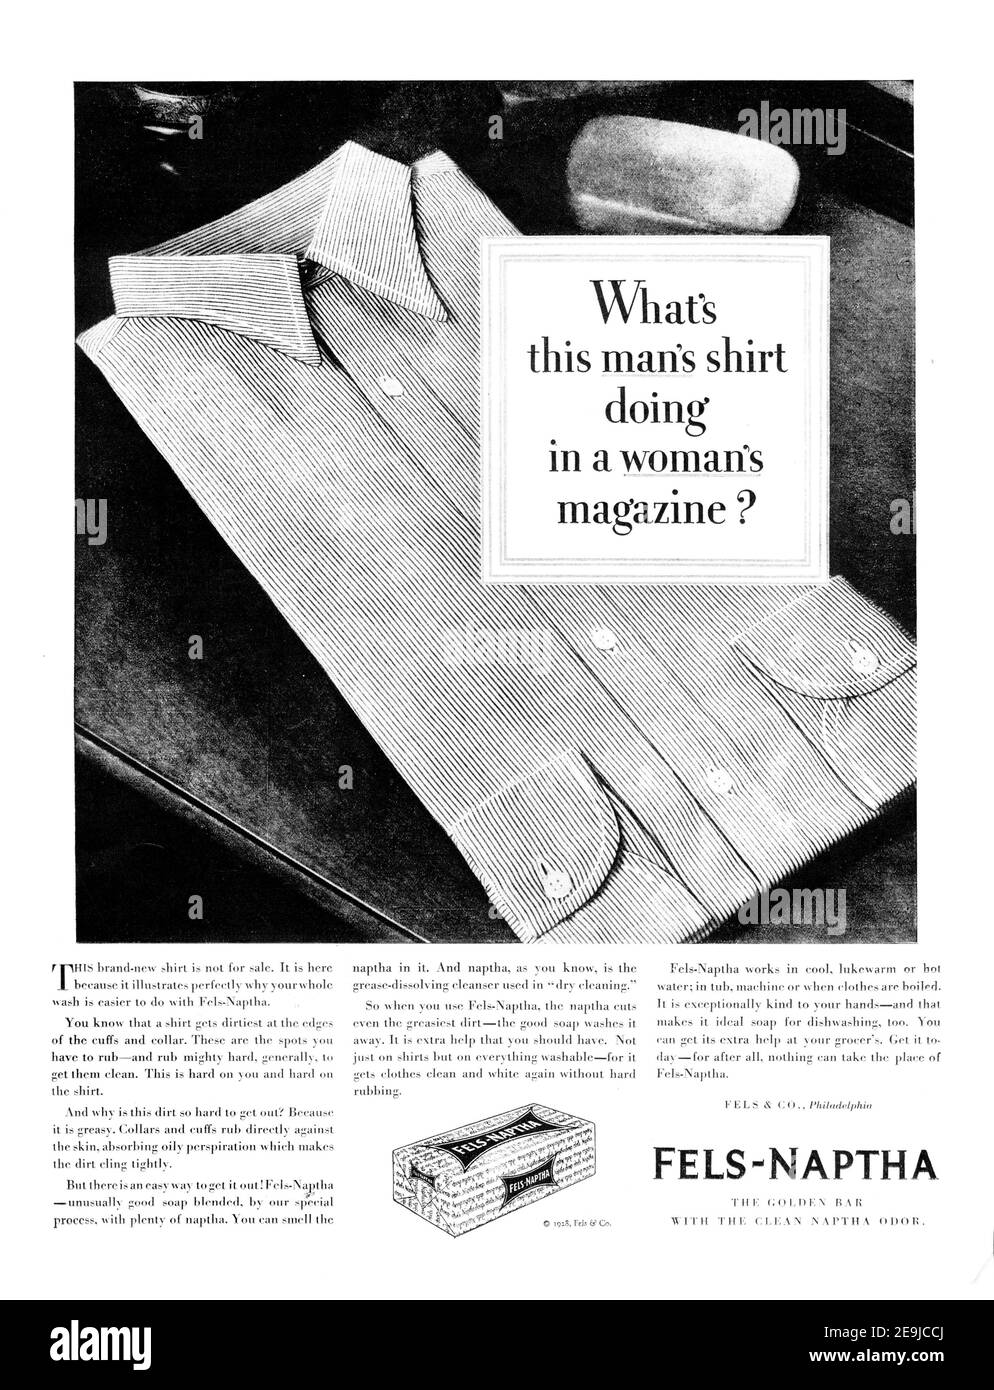 1928 Fels Naptha 'What's The Mans Shirt Doing in Womans Magazine' Advertisement, retouched and revived, cleaned, poster quality, 600dpi Stock Photo